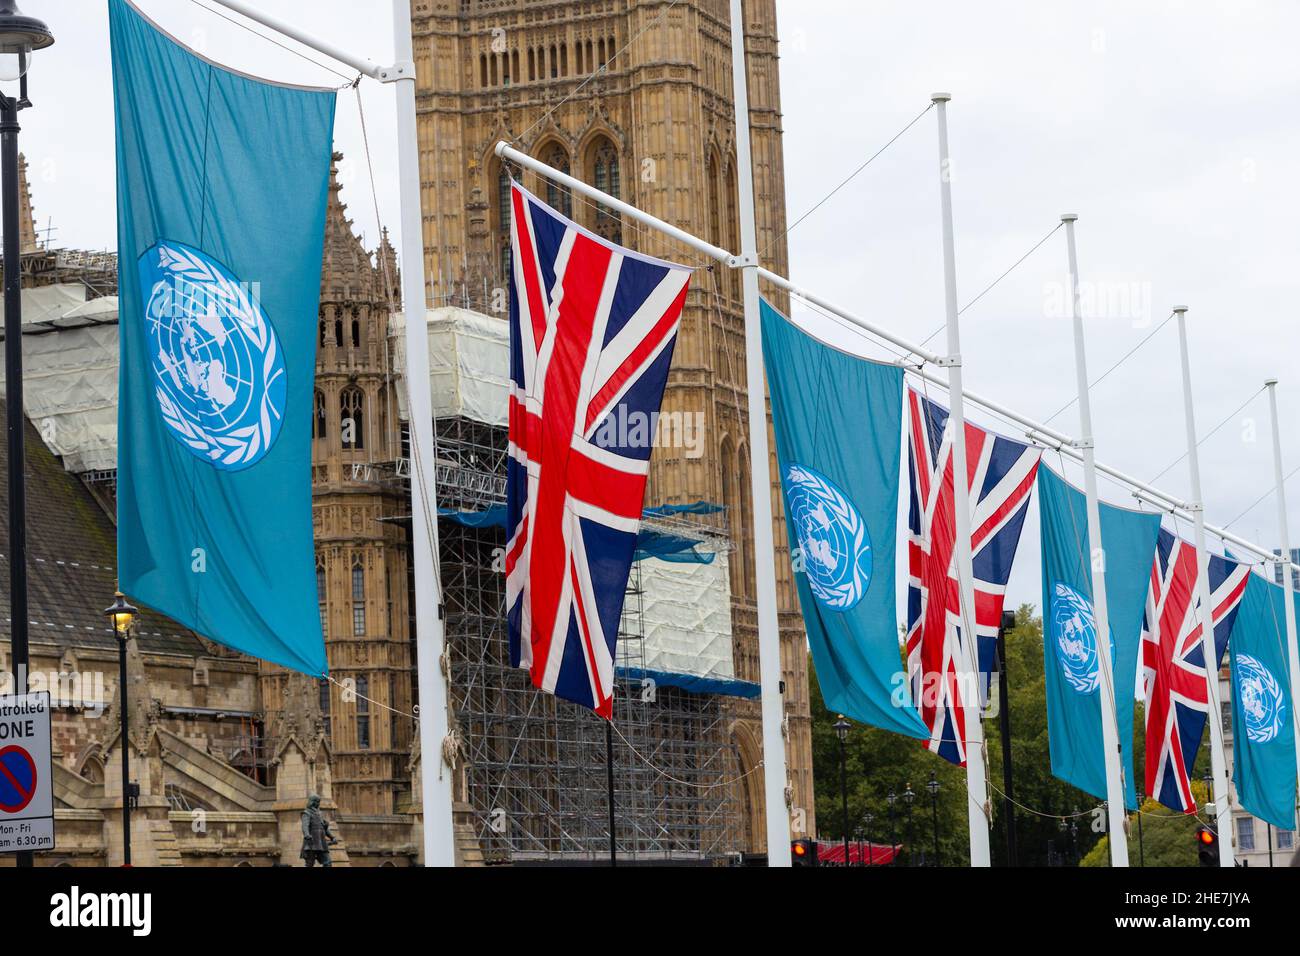 United nations and union jack flags on display outside houses of parliament, london, uk Stock Photo